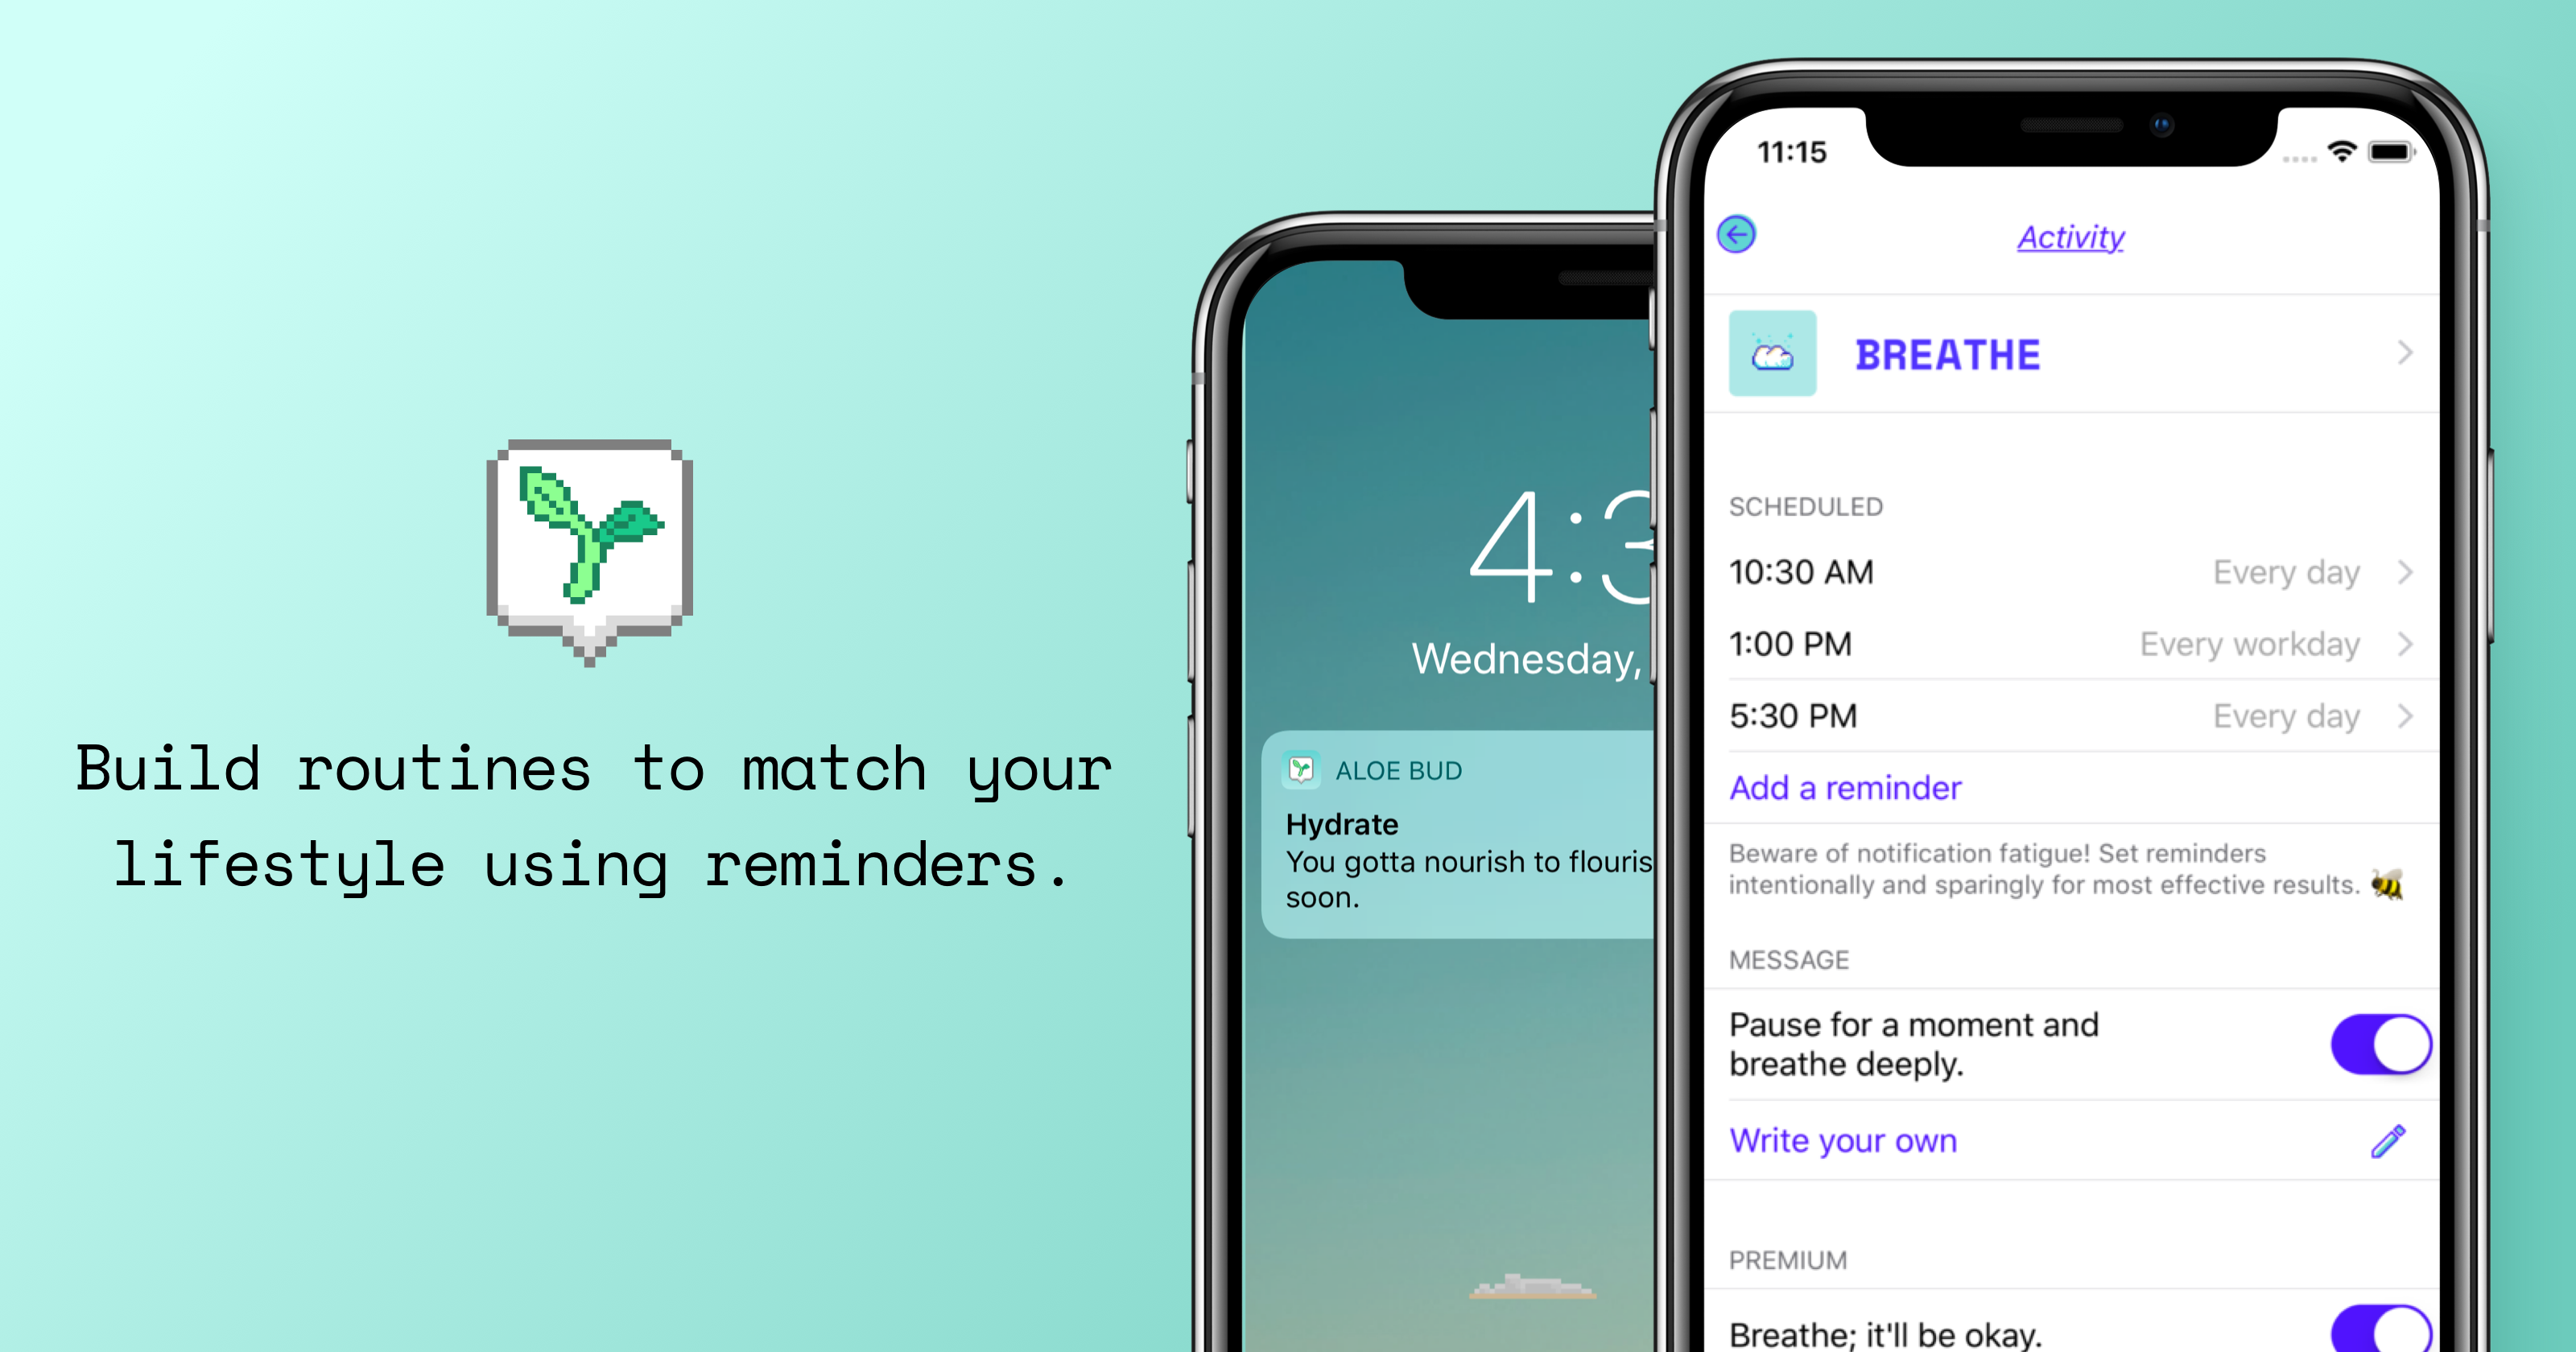 App Store artwork featuring Aloe Bud, a self-care pocket companion, with text saying "Build routines to match your lifestyle using reminders."